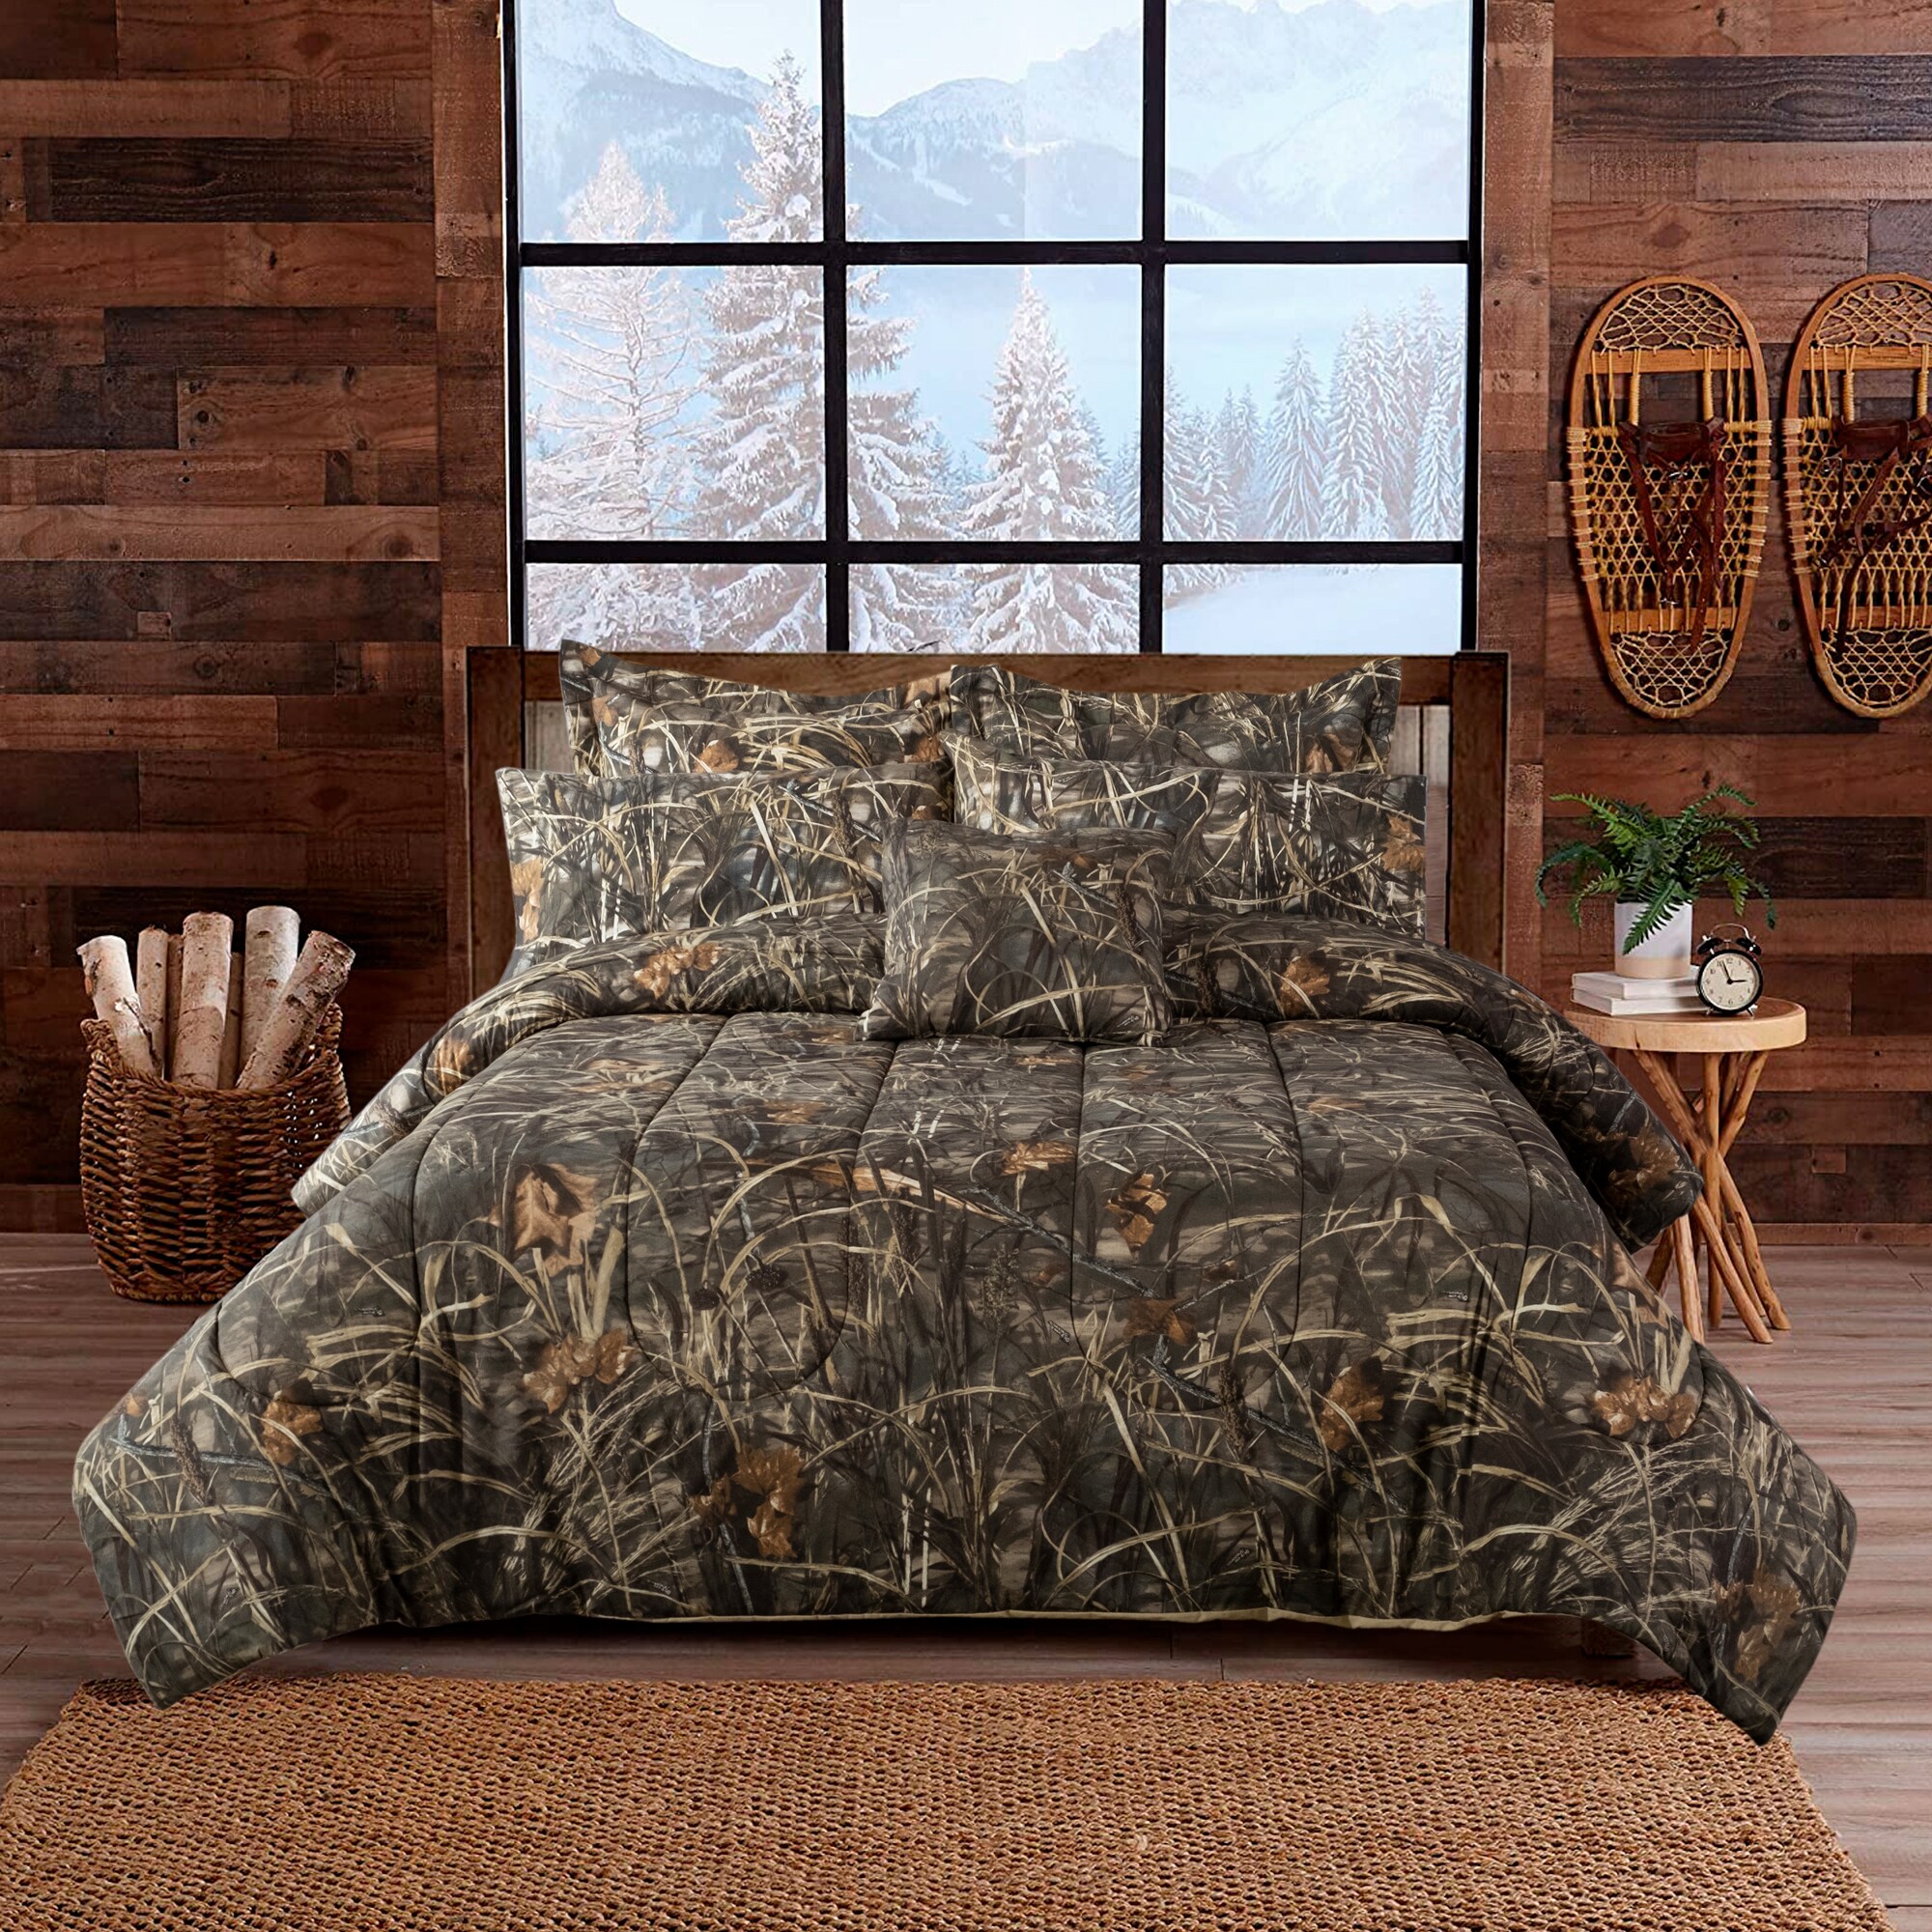 NATURAL BROWN CAMO SHEET SET! FULL SIZE BEDDING 6 PC CAMOUFLAGE LIGHT WOODS 